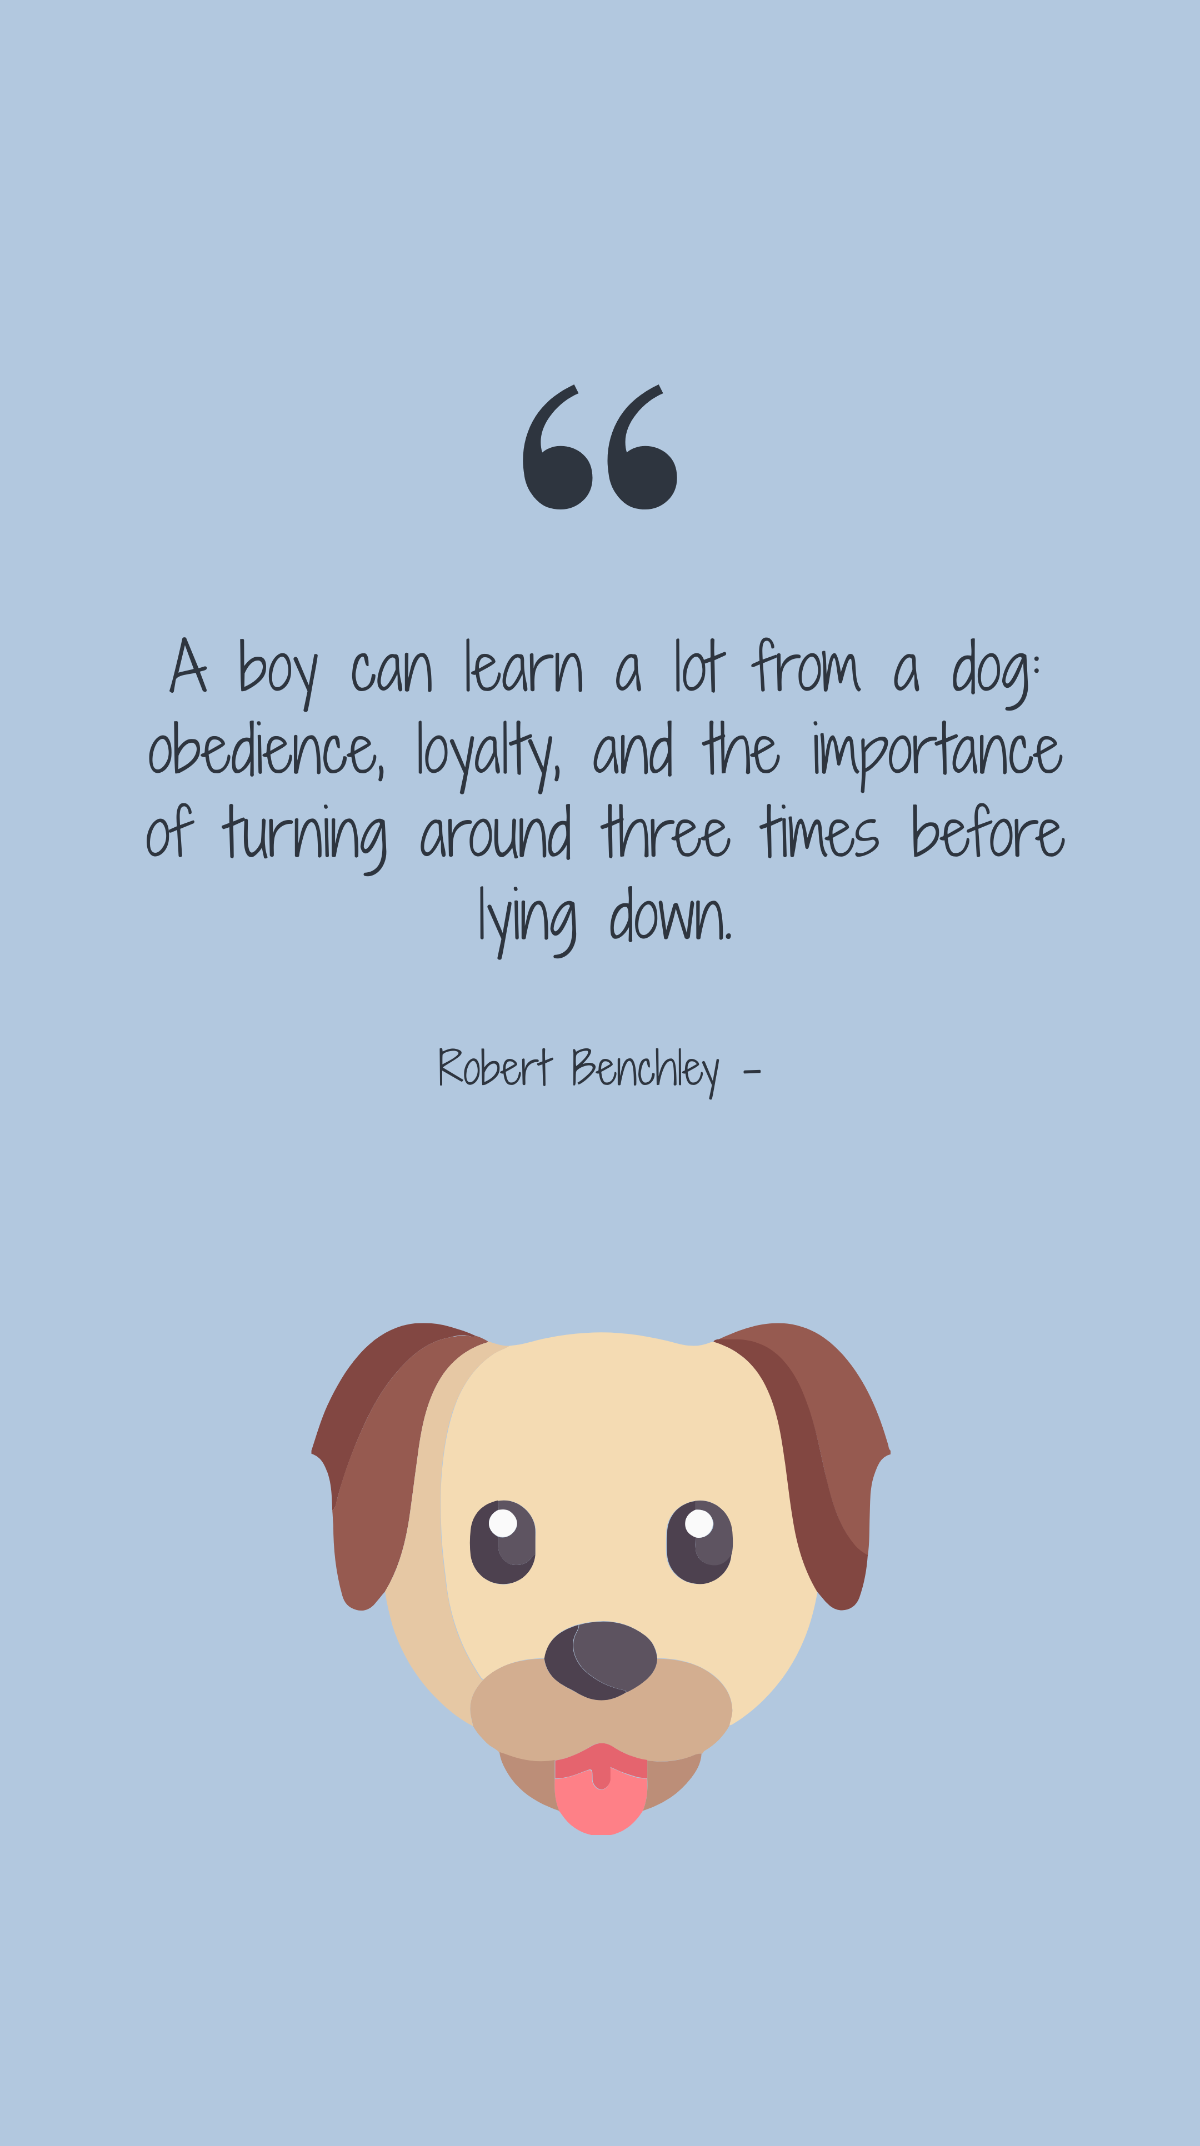 Robert Benchley - A boy can learn a lot from a dog: obedience, loyalty, and the importance of turning around three times before lying down. Template